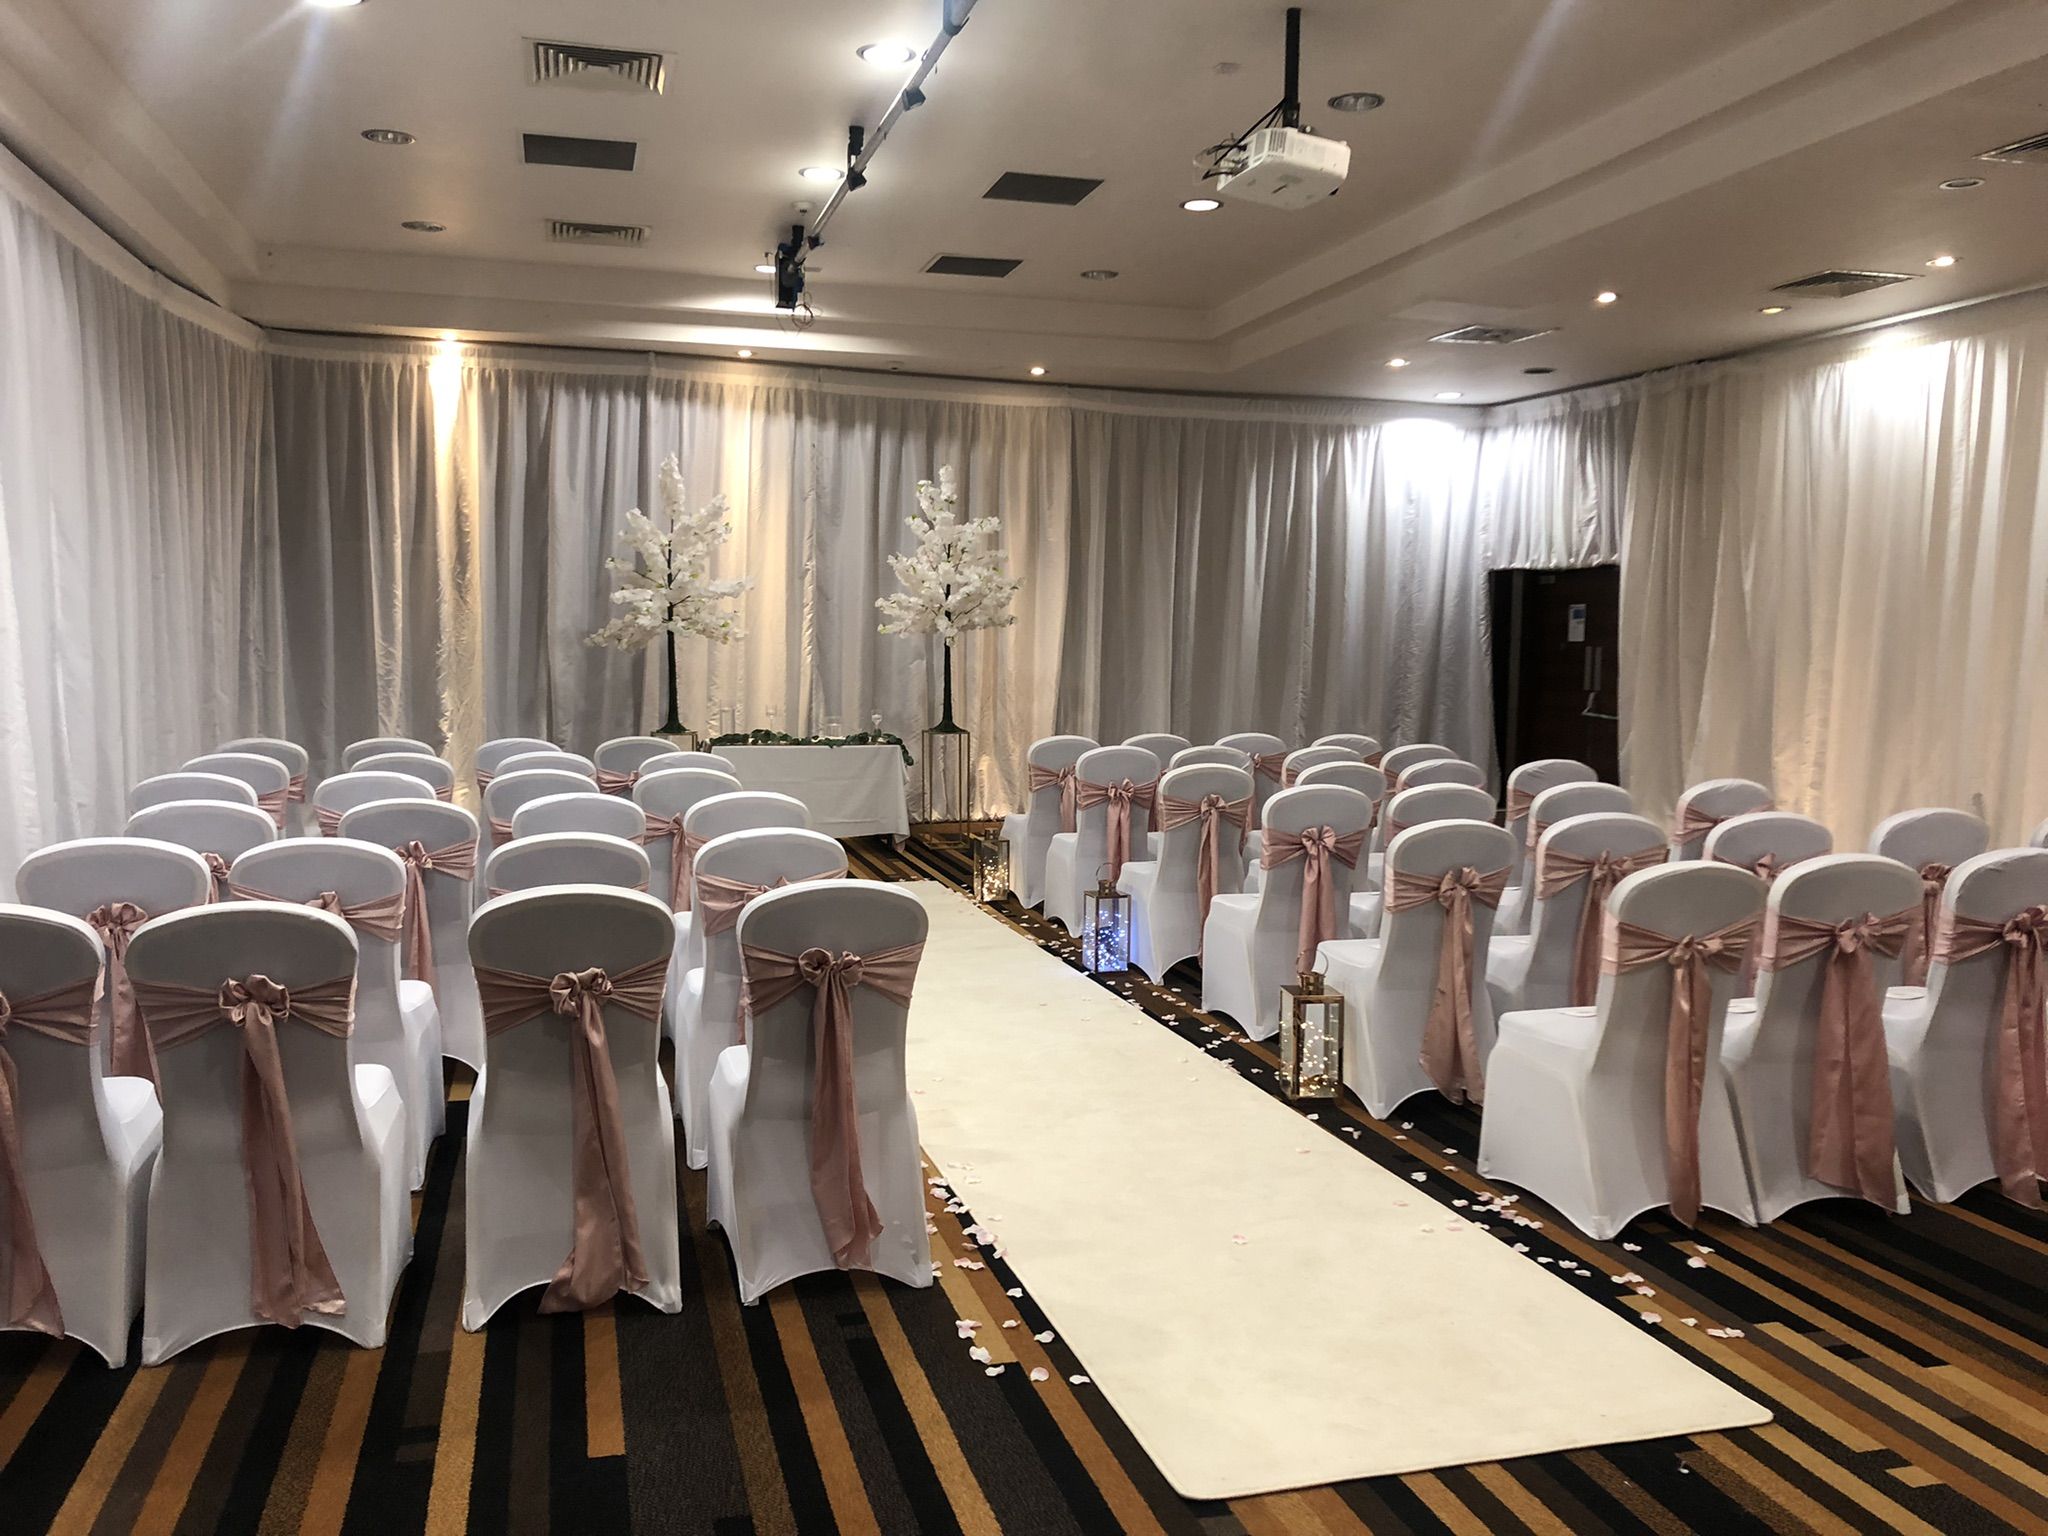 a banquet hall with rows of chairs and a white aisle.